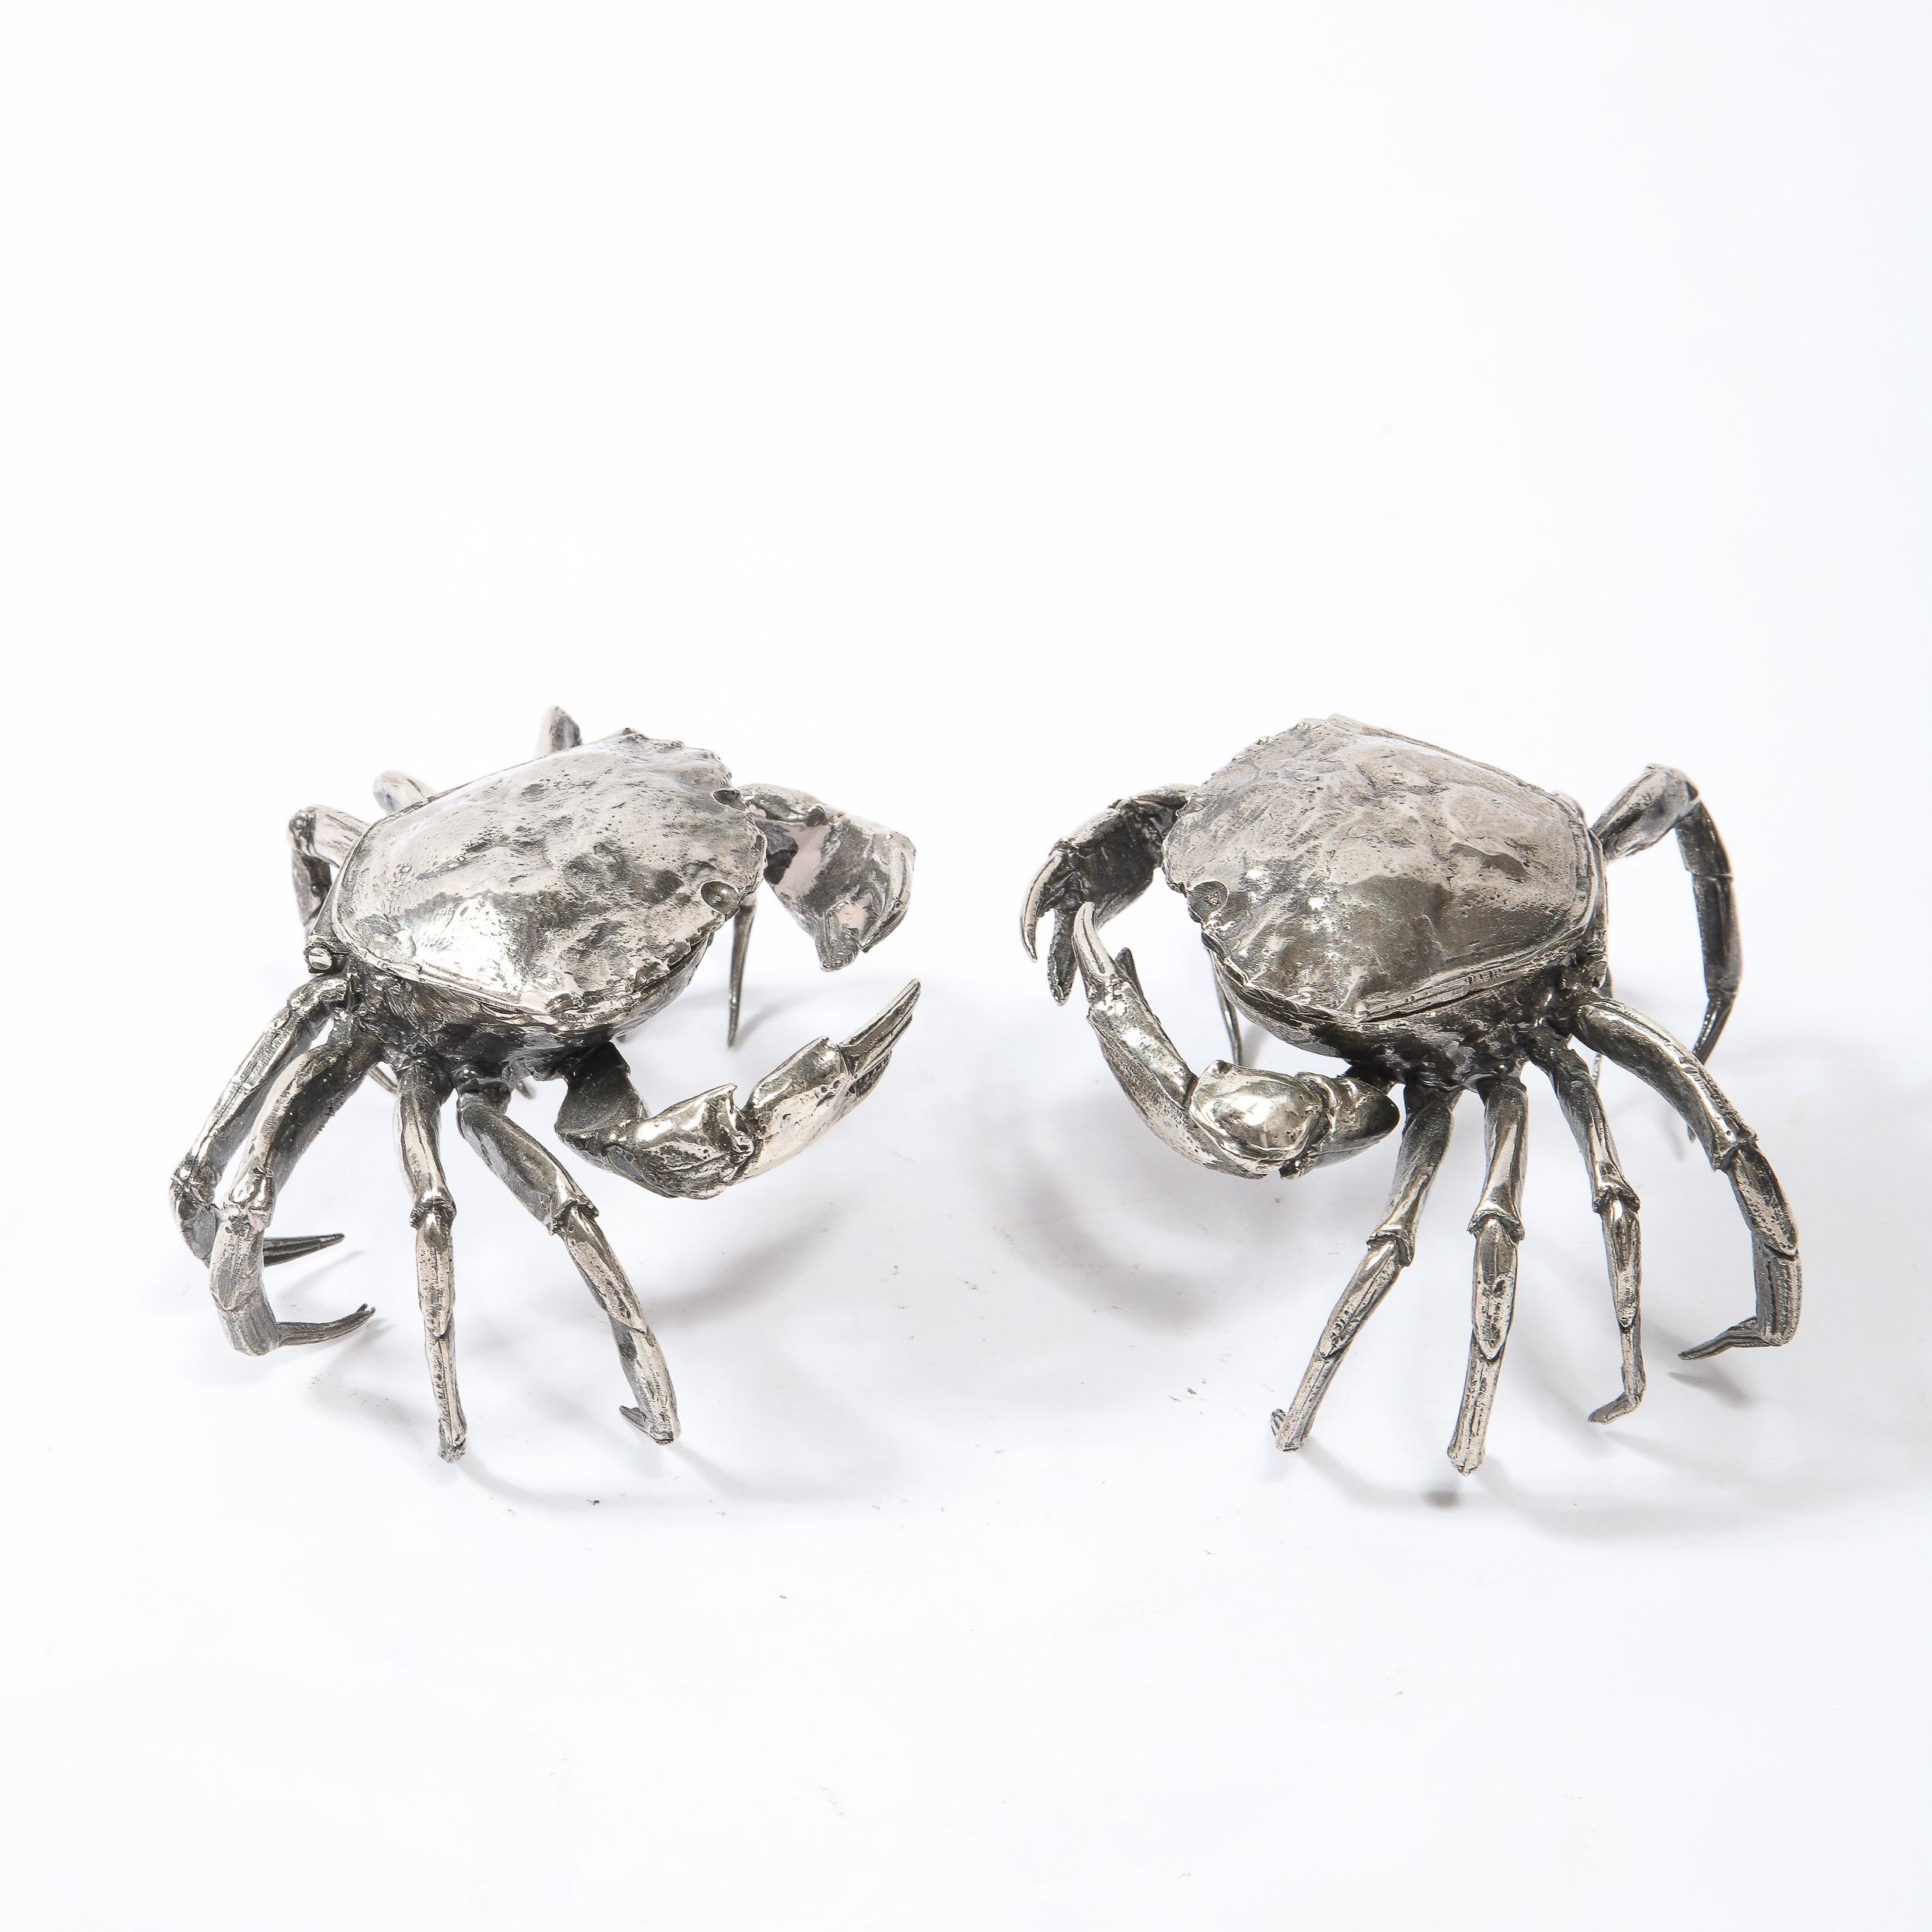 Italian Pair of Modernist Sterling Silver Hand Wrought Stylized Crab Salt Cellars